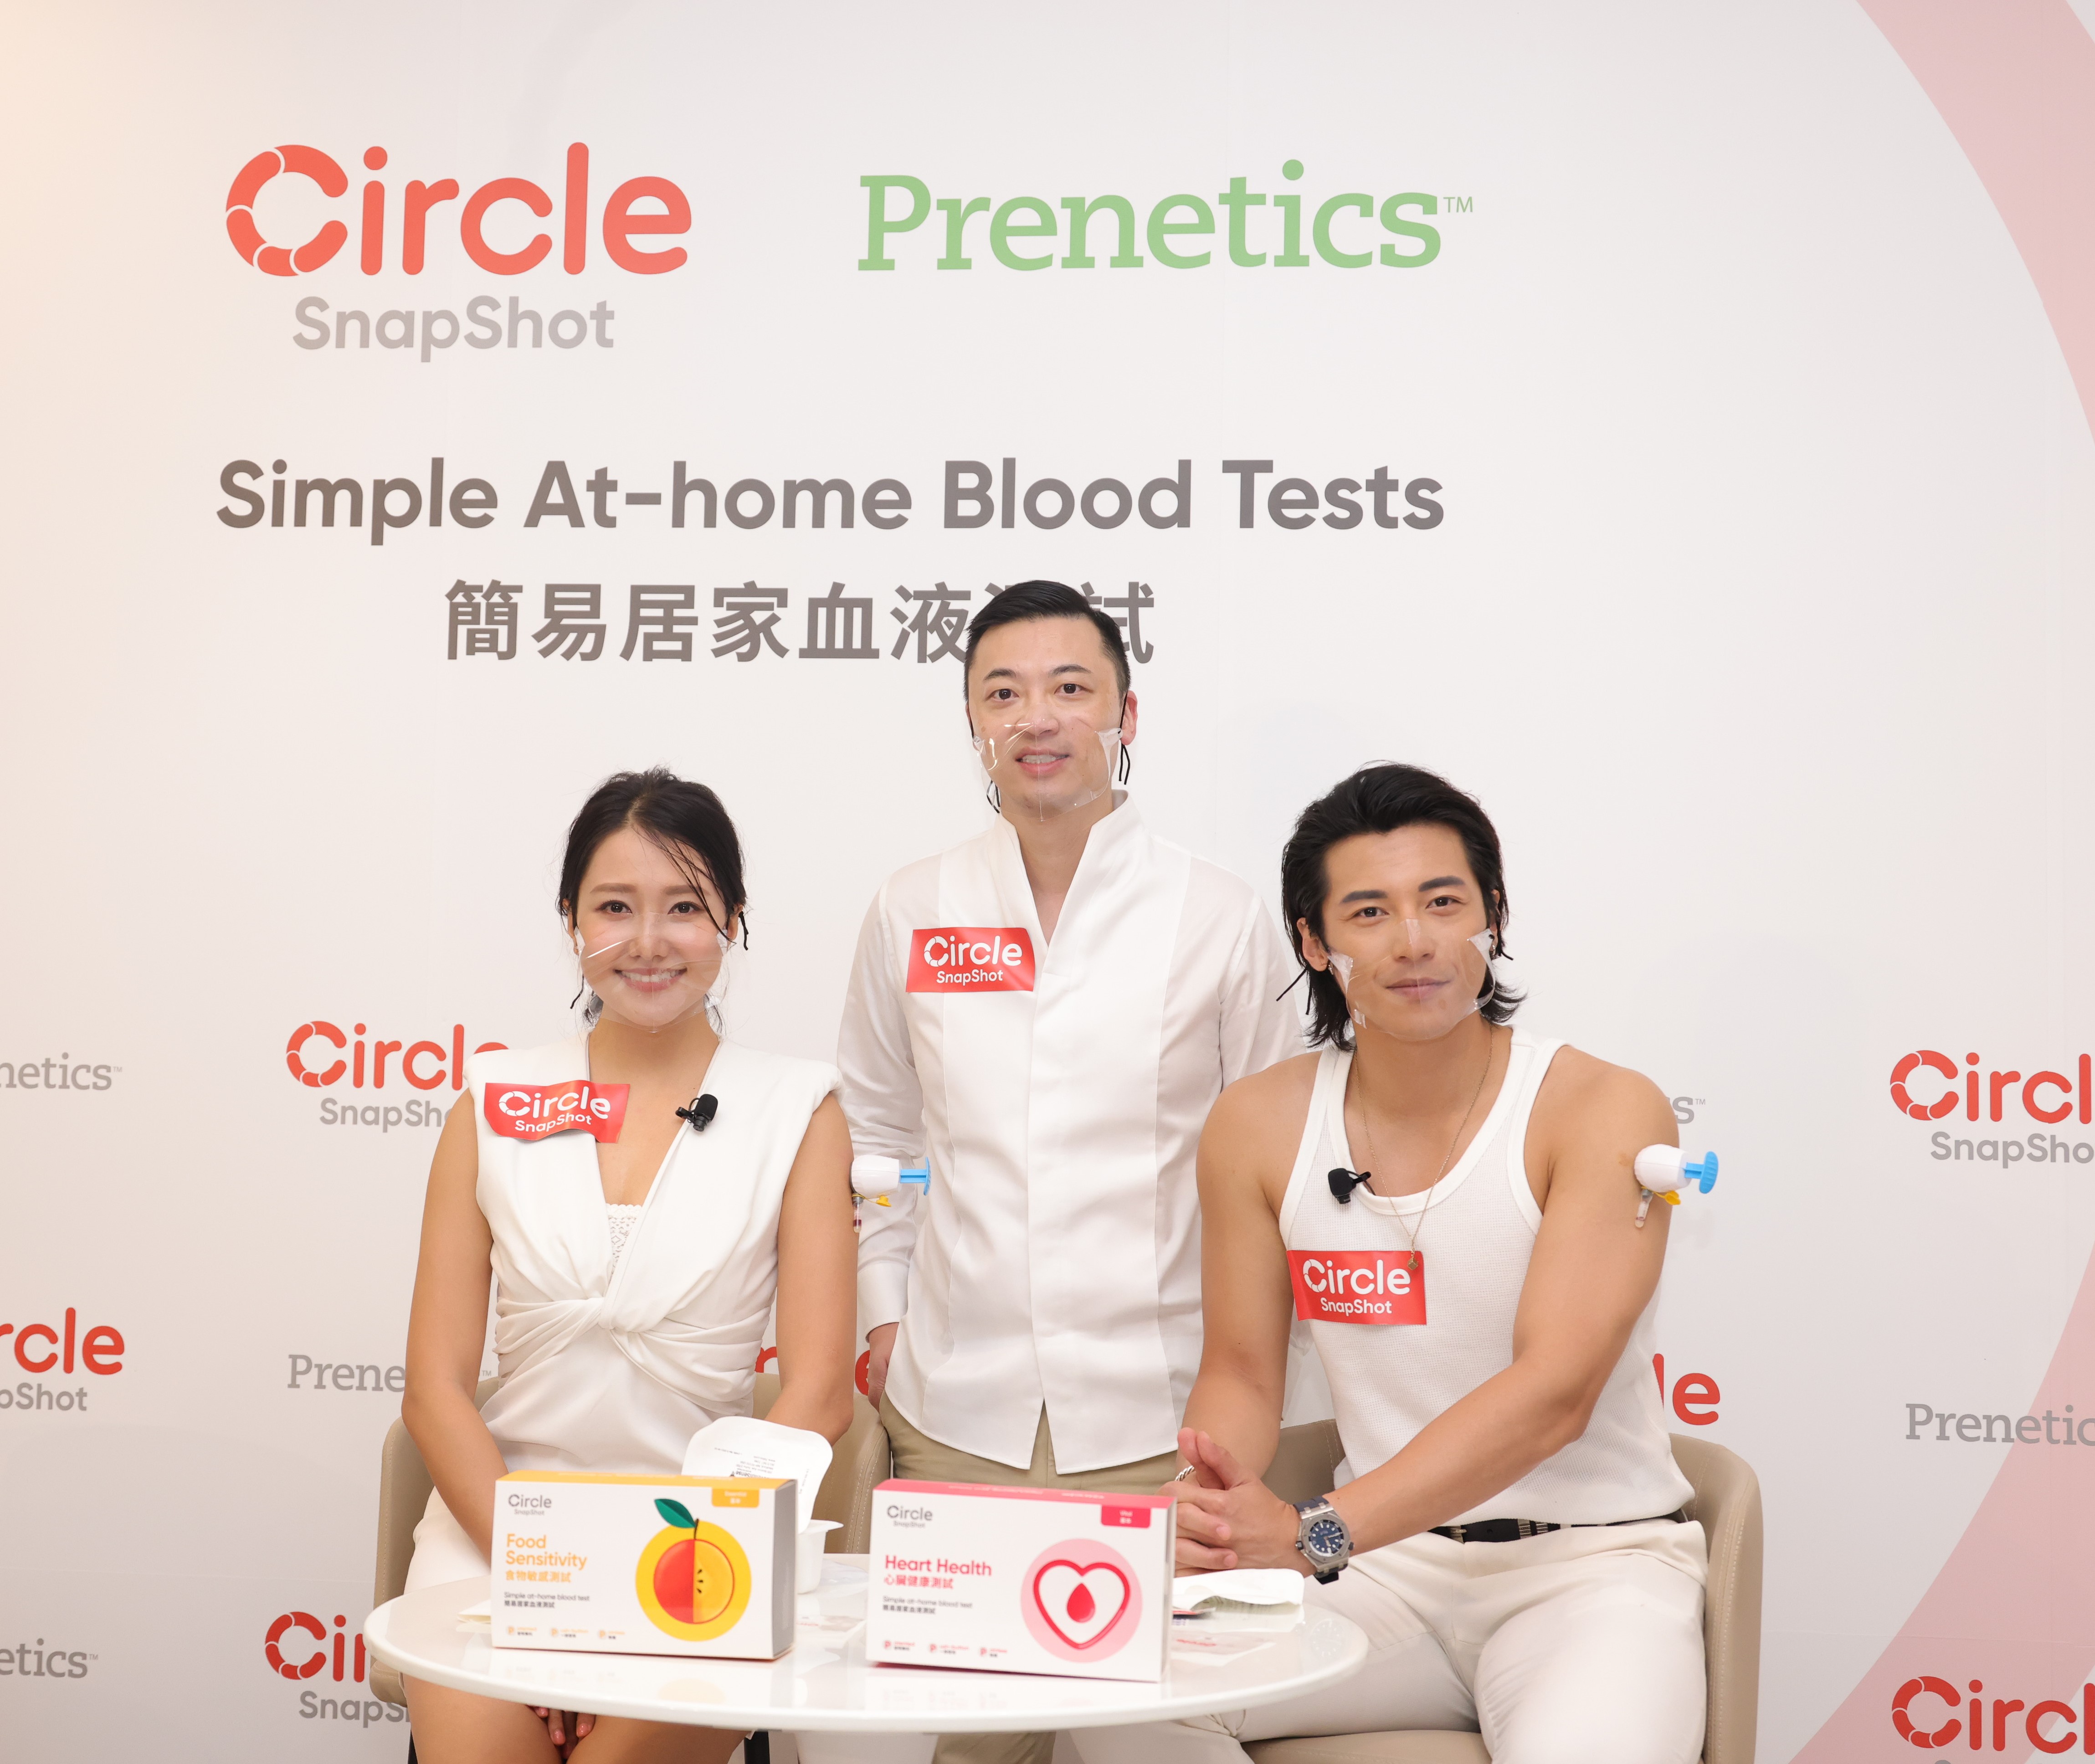 Circle SnapShot by Prenetics Introduces Hong Kong’s First Painless At-Home Blood Tests